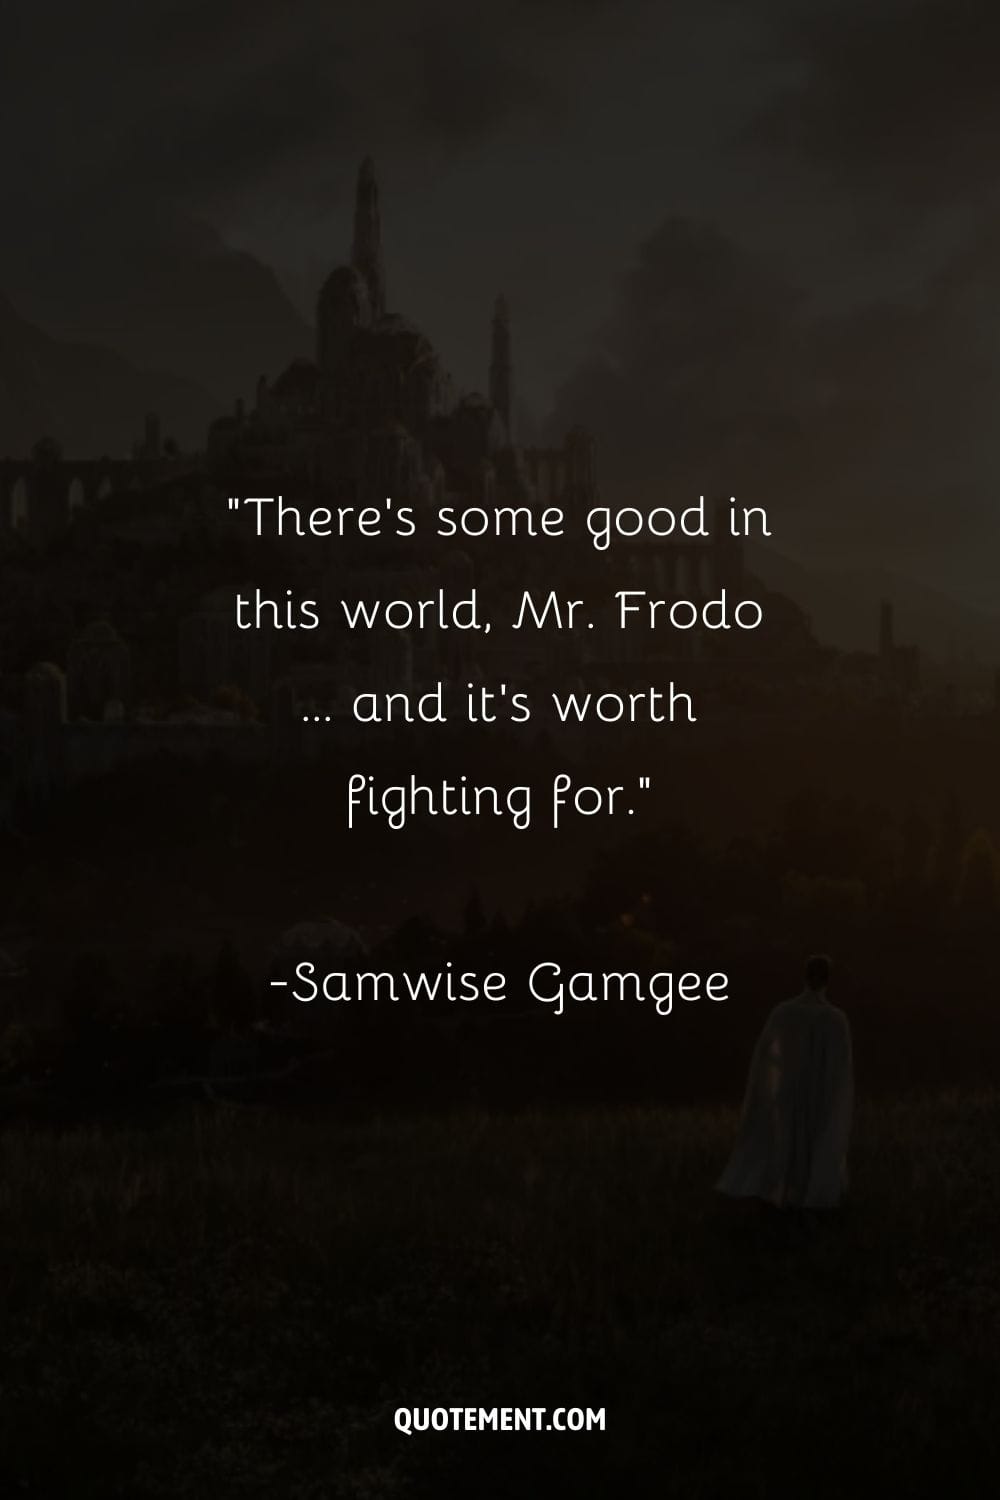 There’s some good in this world, Mr. Frodo … and it’s worth fighting for.